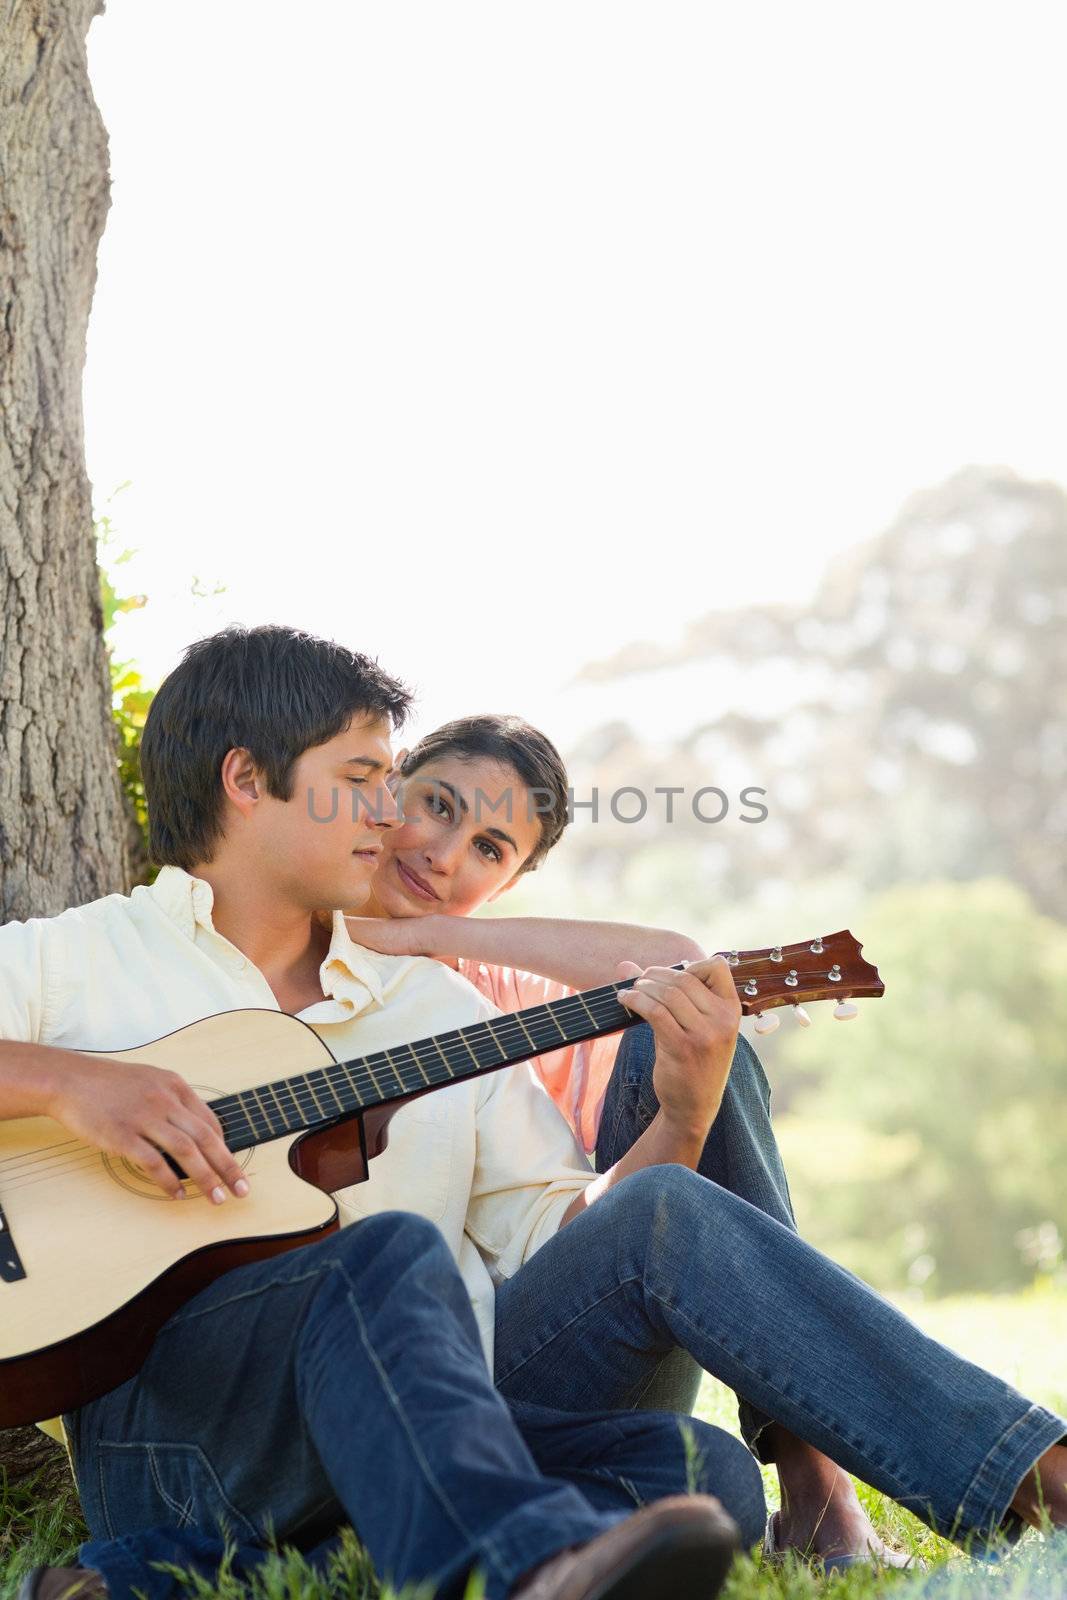 Man looking down while playing the guitar as his friend watches  by Wavebreakmedia